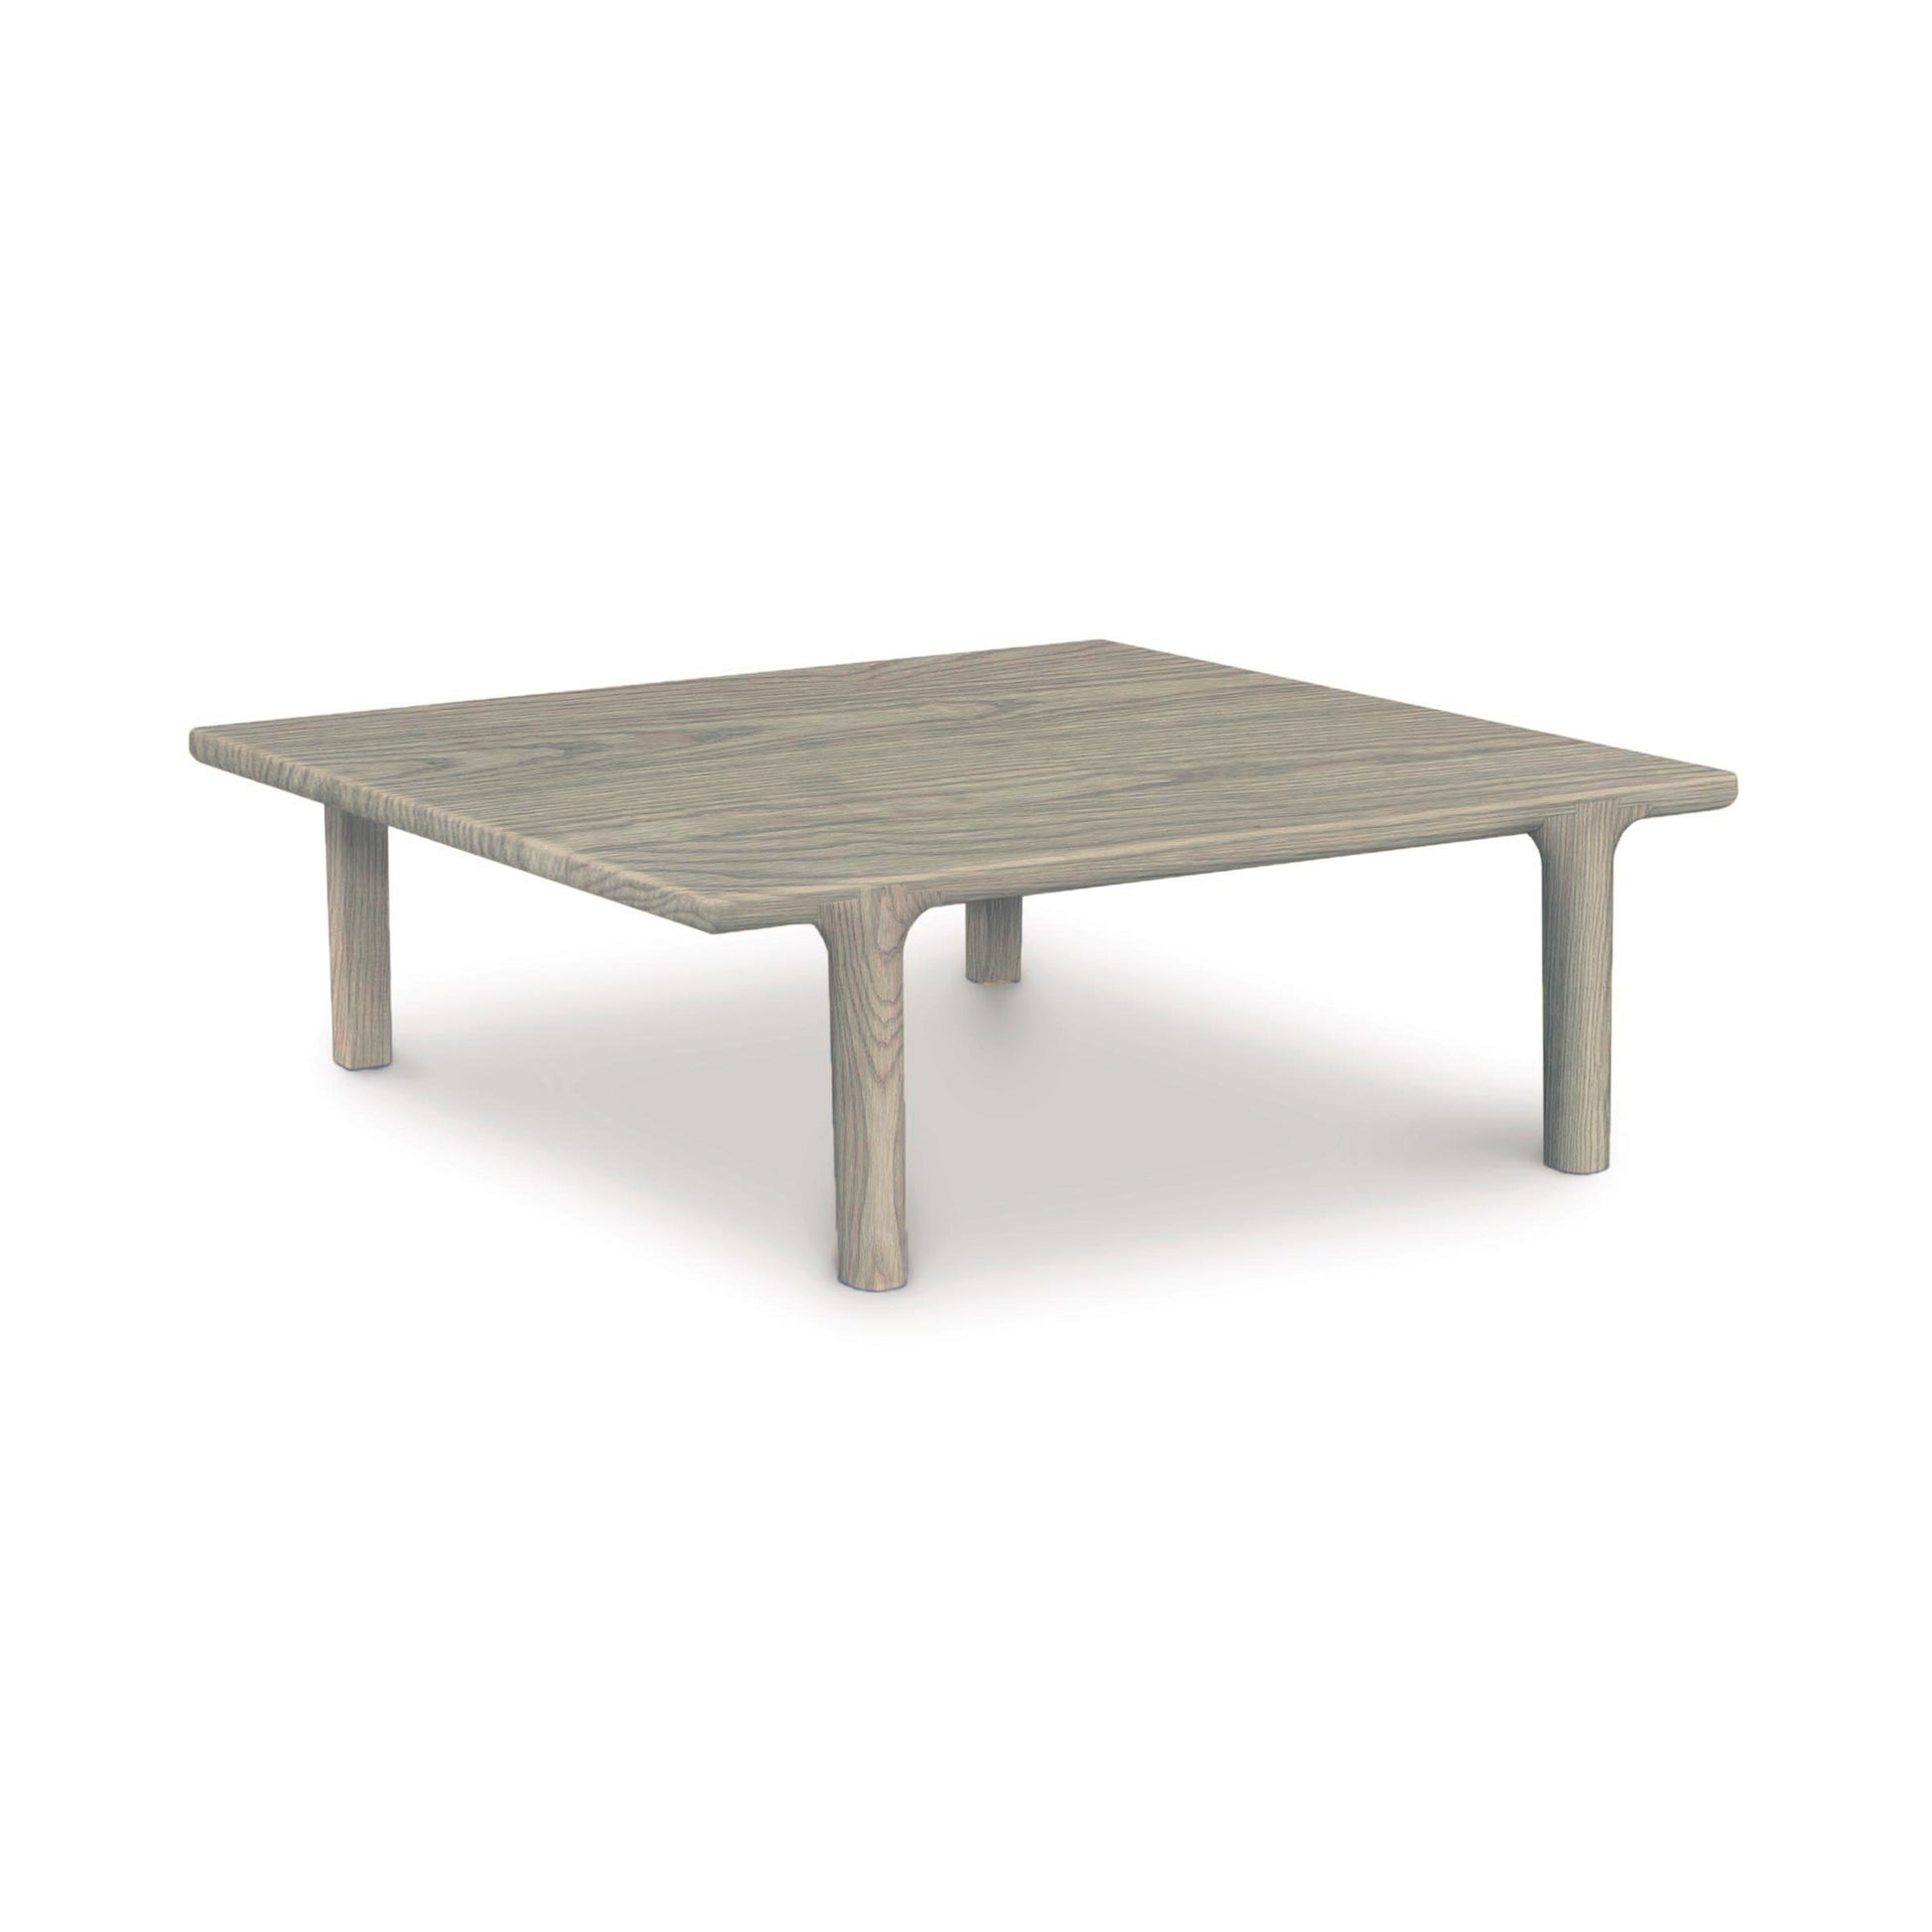 The Copeland Furniture Sierra Square Coffee Table showcases a contemporary design, featuring two legs on a white background.